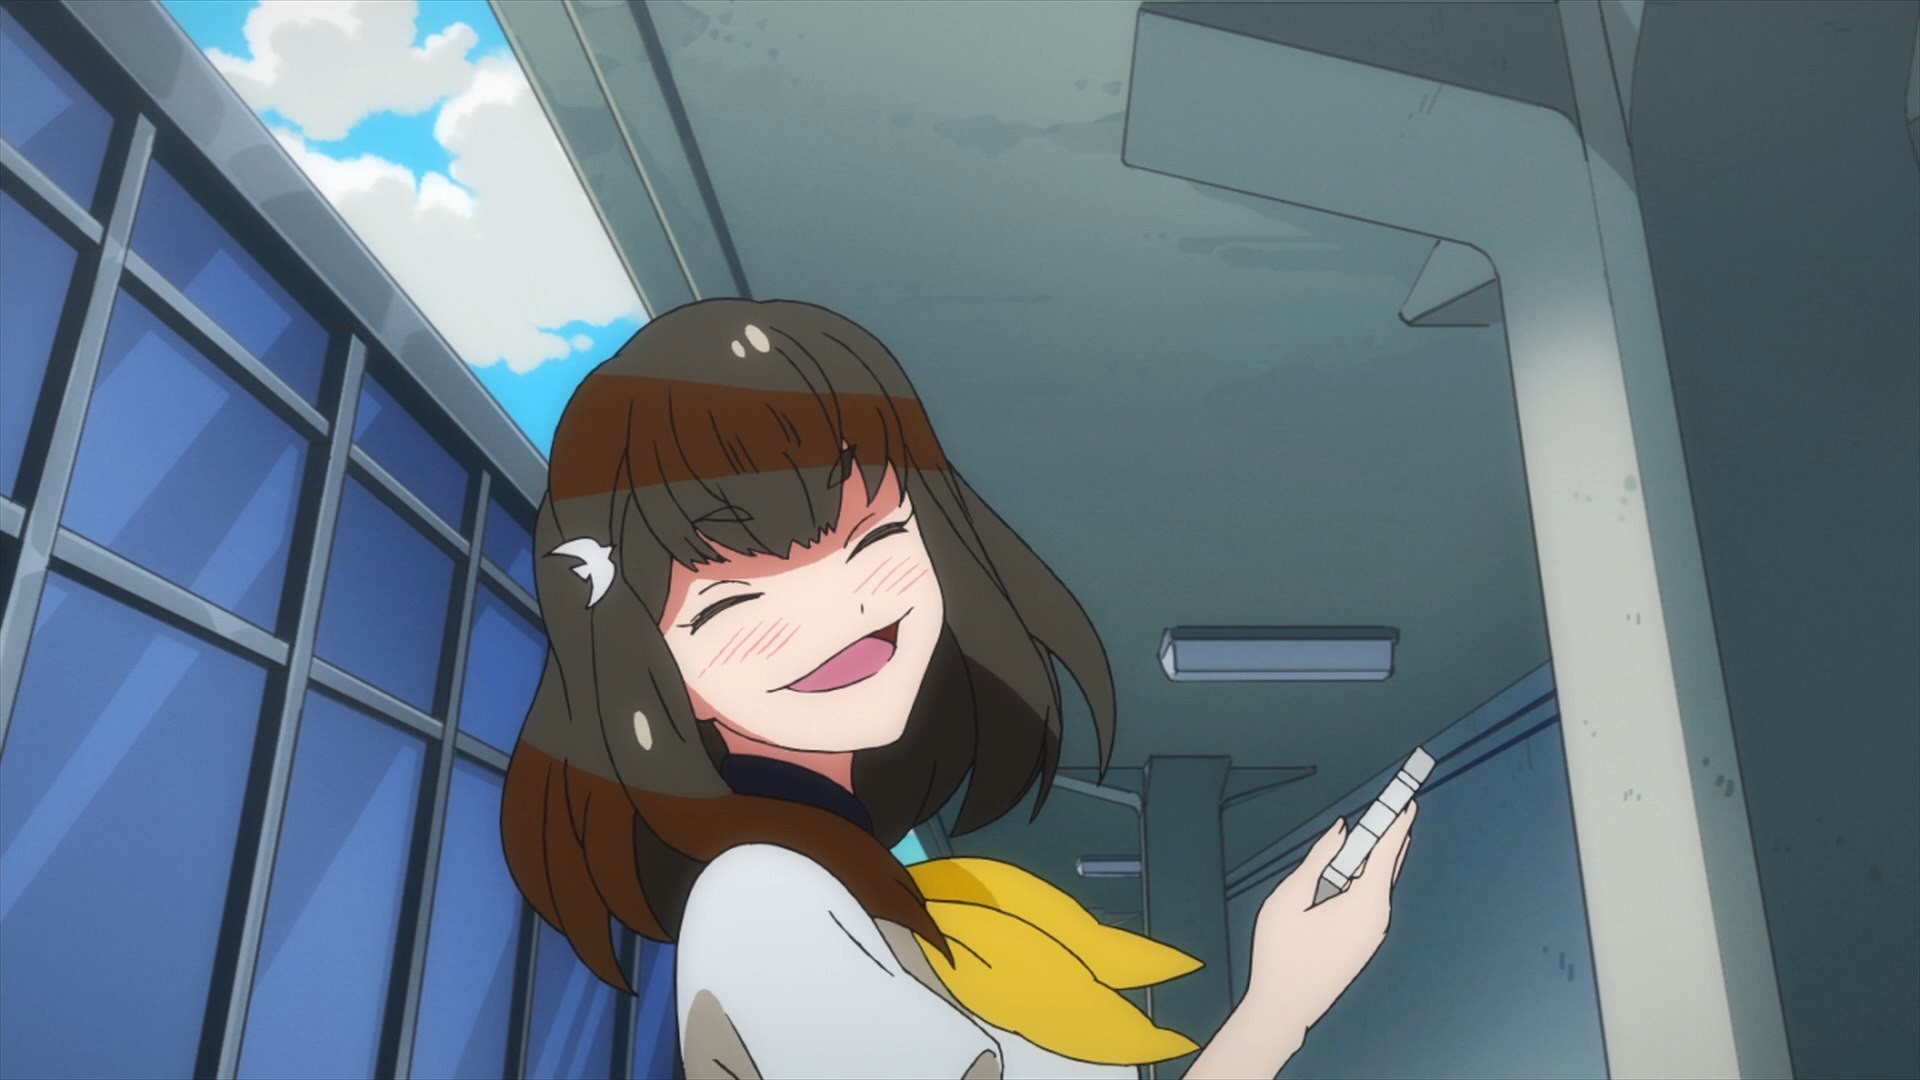 1920x1080 The Many Lessons of Gatchaman Crowds